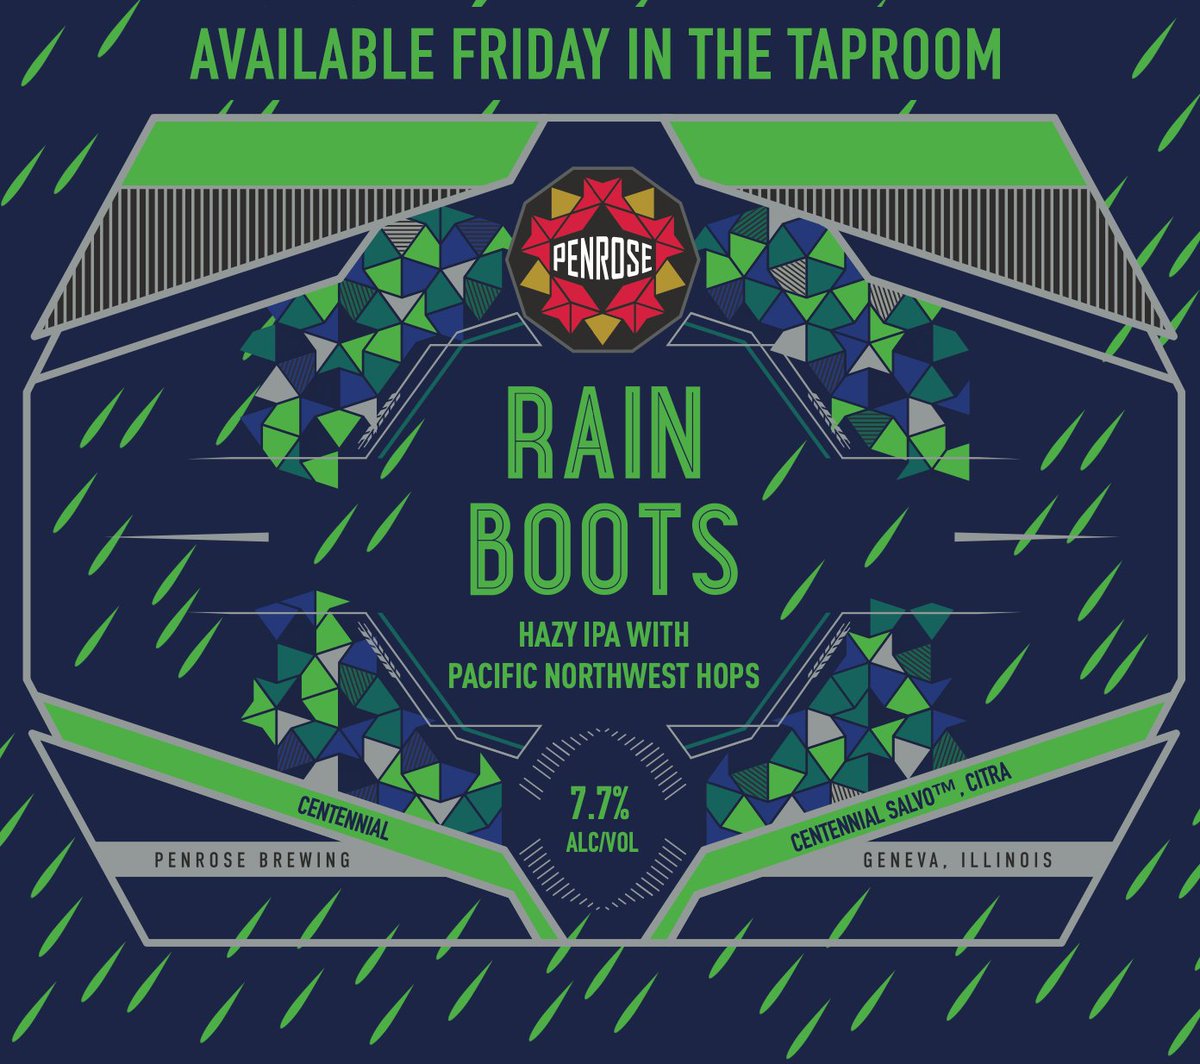 Today's weather seems like a good reason to let you all know what's coming Friday!
The latest addition to the Boots series – a refreshing Hazy IPA crafted exclusively with hops sourced from the lush Pacific Northwest. 
#Penrose #RainBoots #HazyIPA